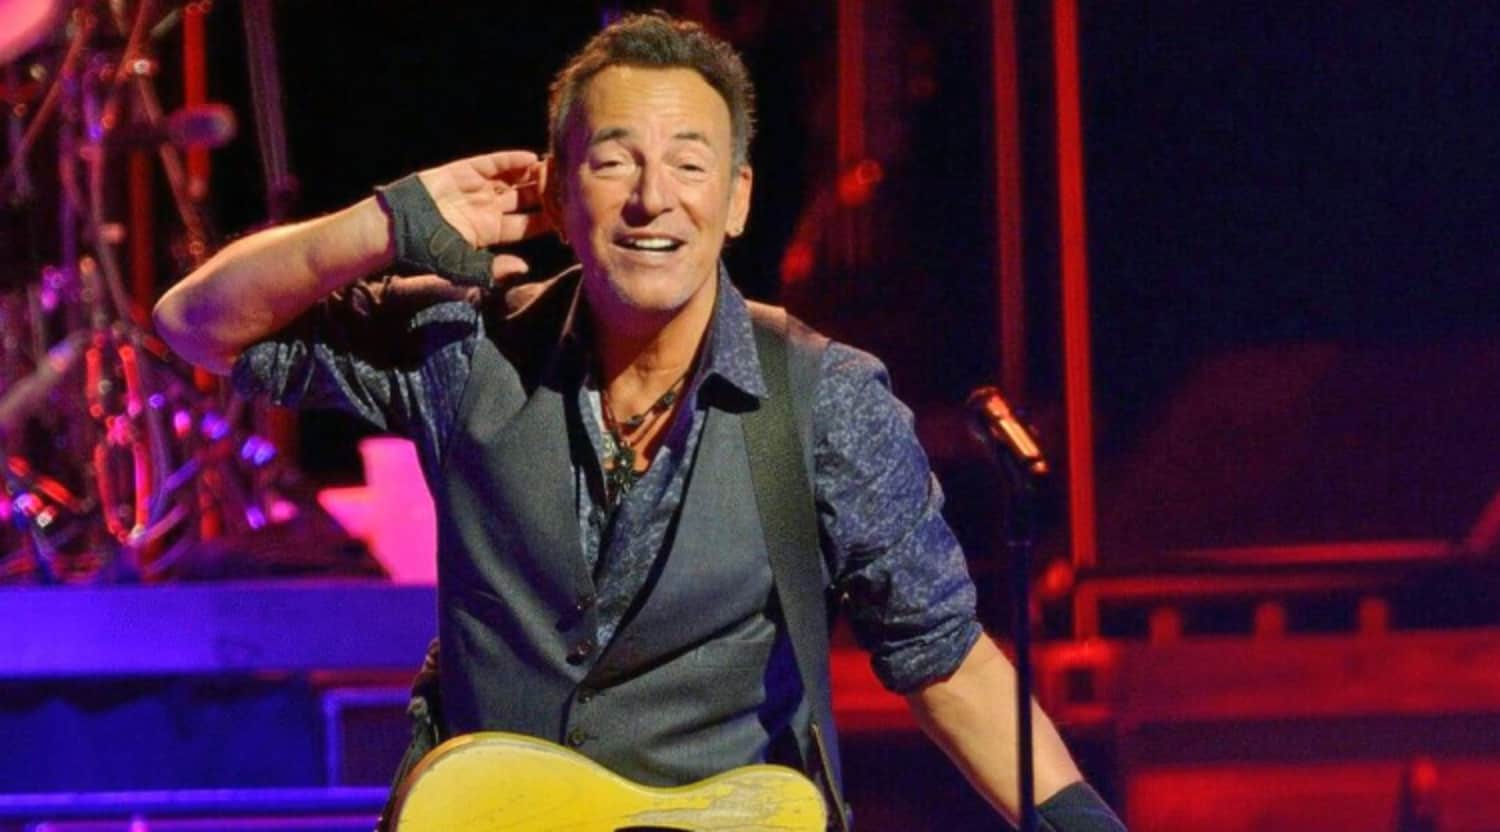 Bruce Springsteen Tickets - Bruce Springsteen Concert Tickets and ...